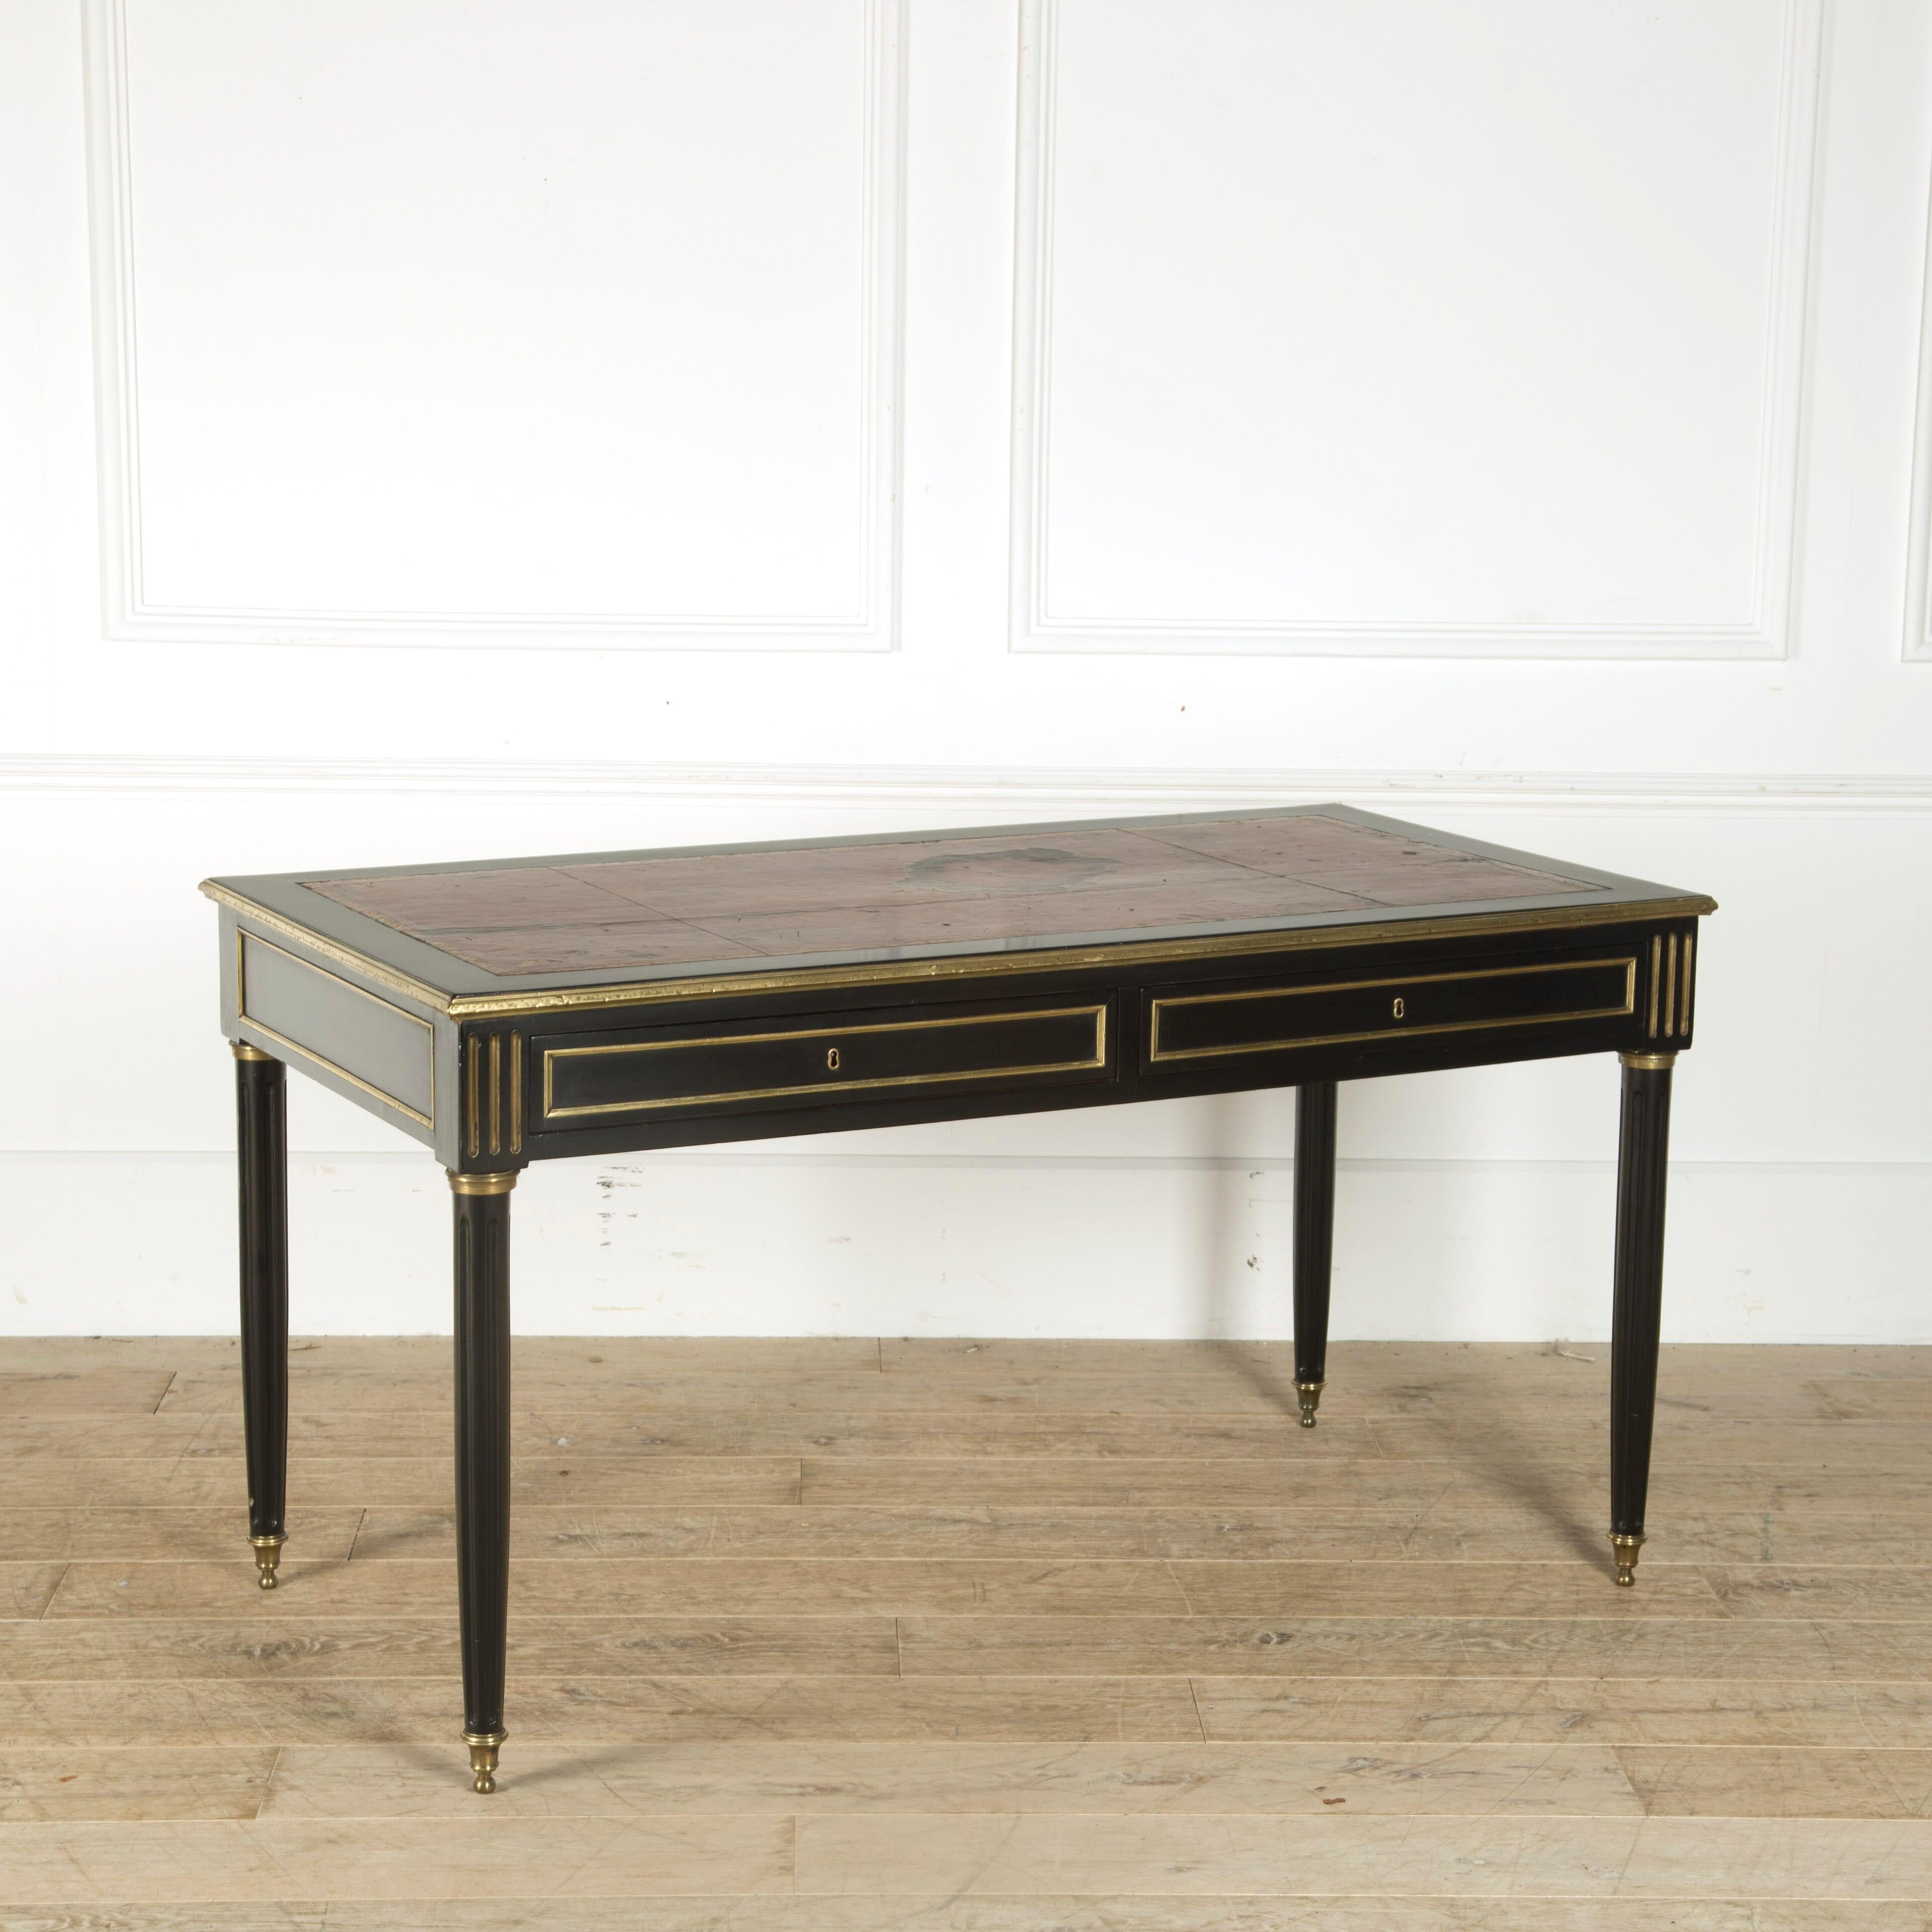 19th century French ebonised bureau plat with brass mouldings, fluted legs and nicely worn original leather top.